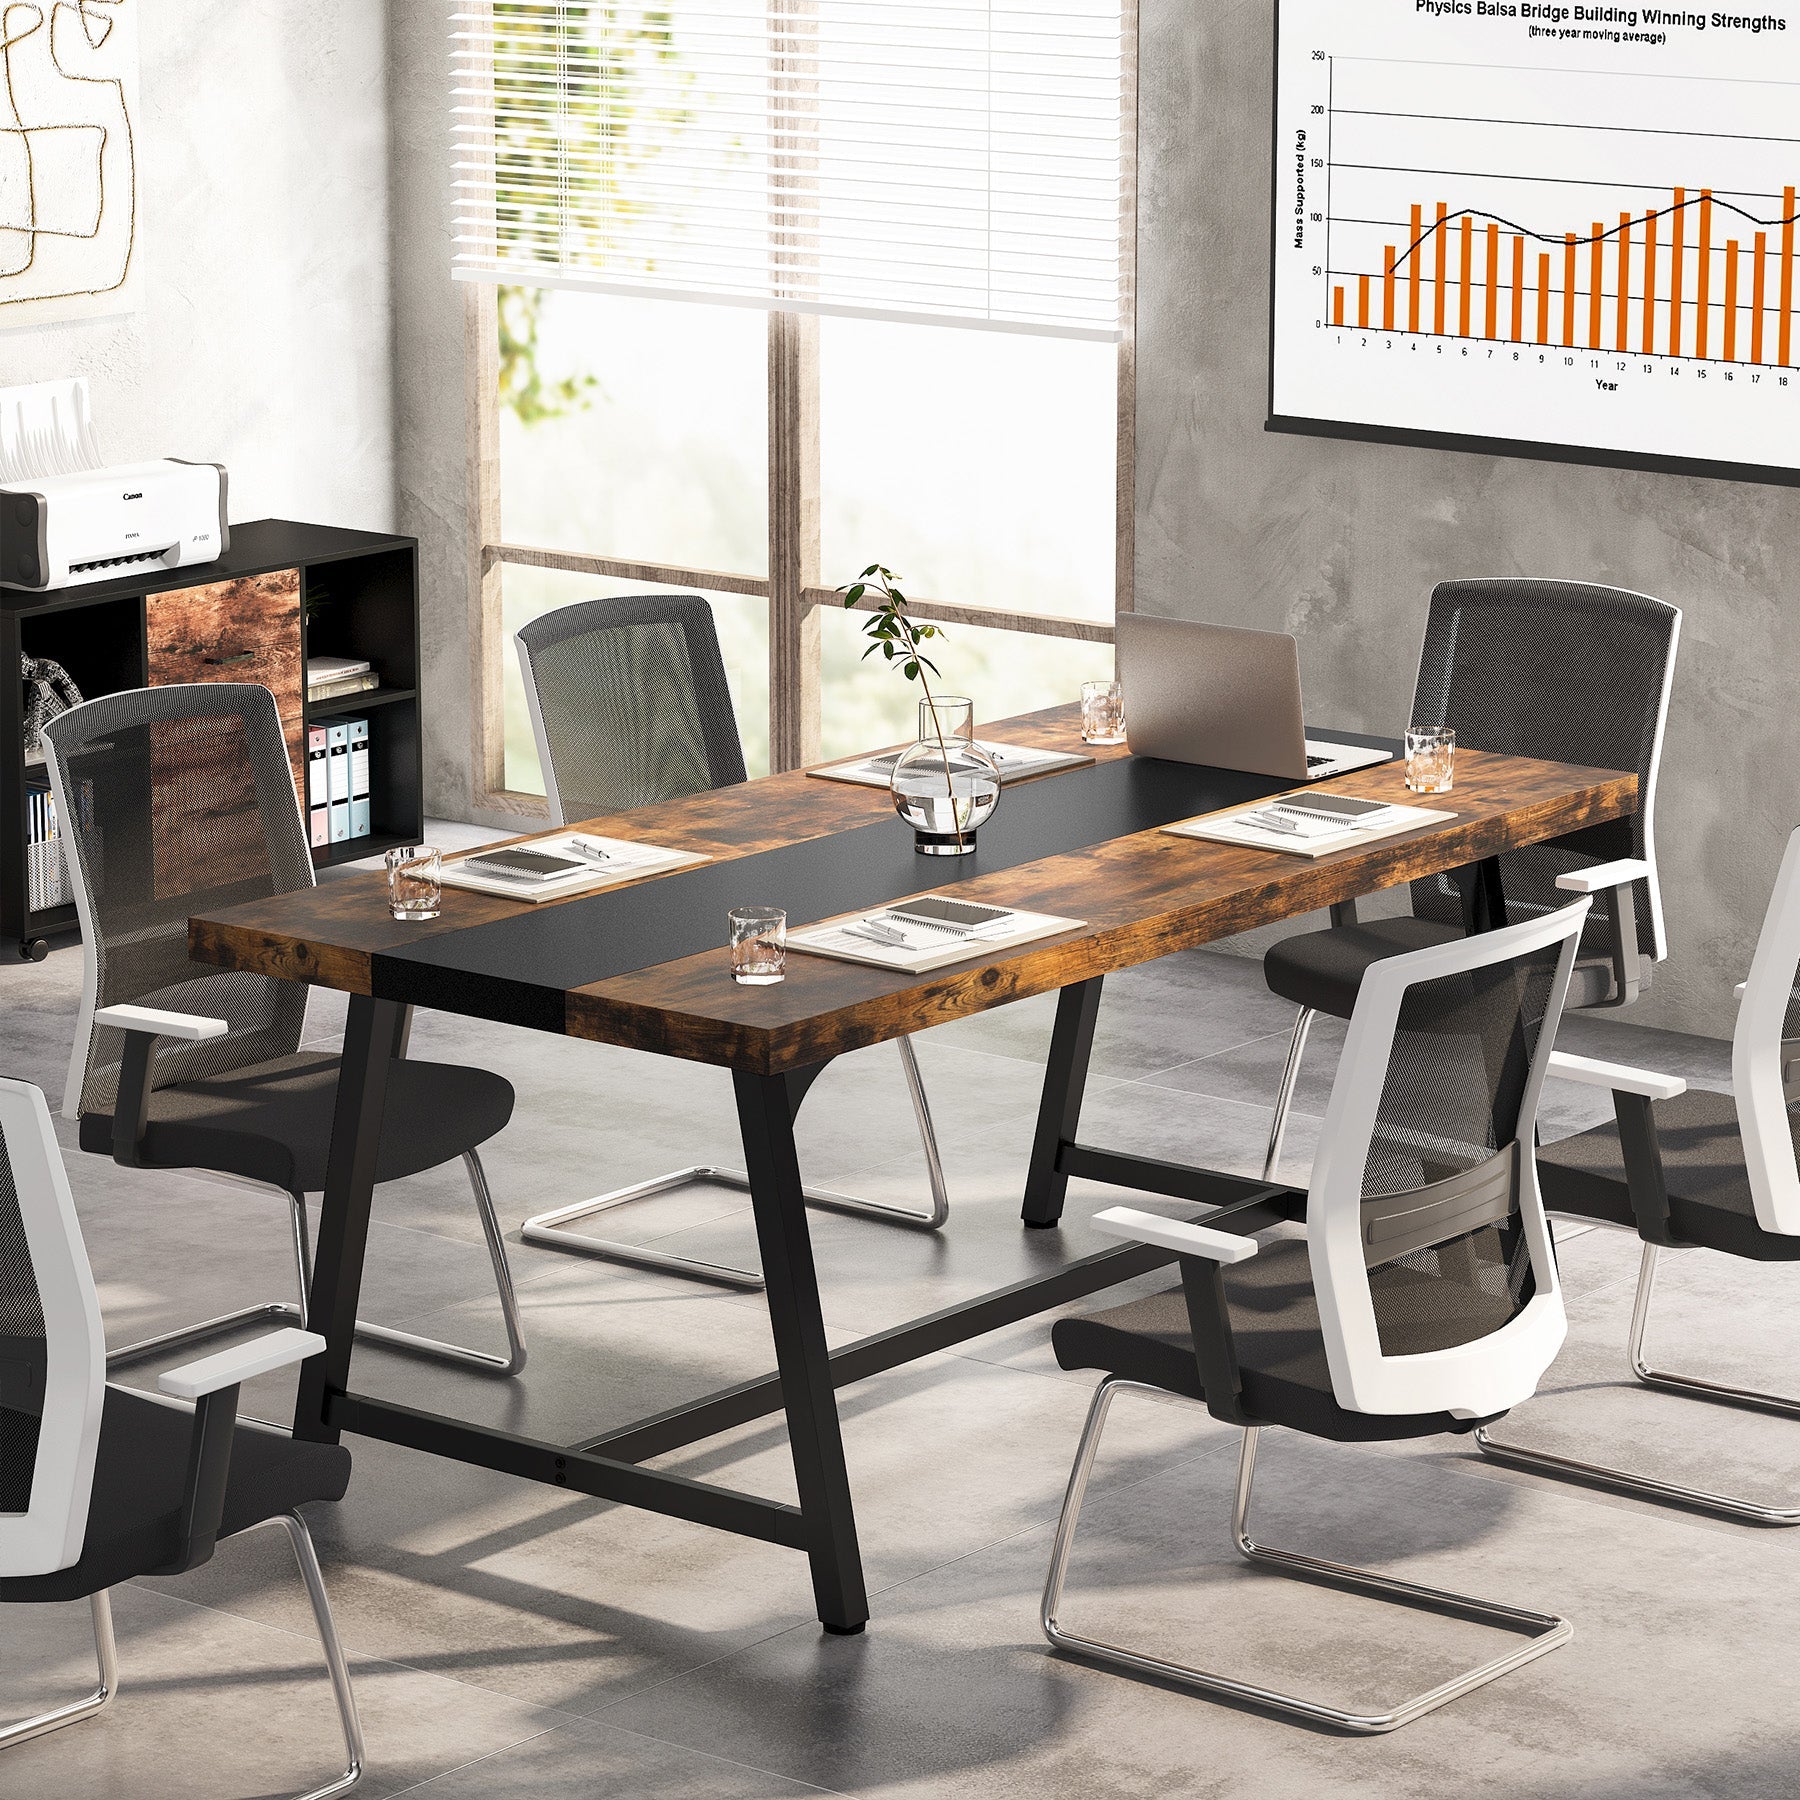 Tribesigns - 6FT Conference Table, 70.8-Inch, Executive Desk Office Computer Meeting Table, Rustic Brown & Black